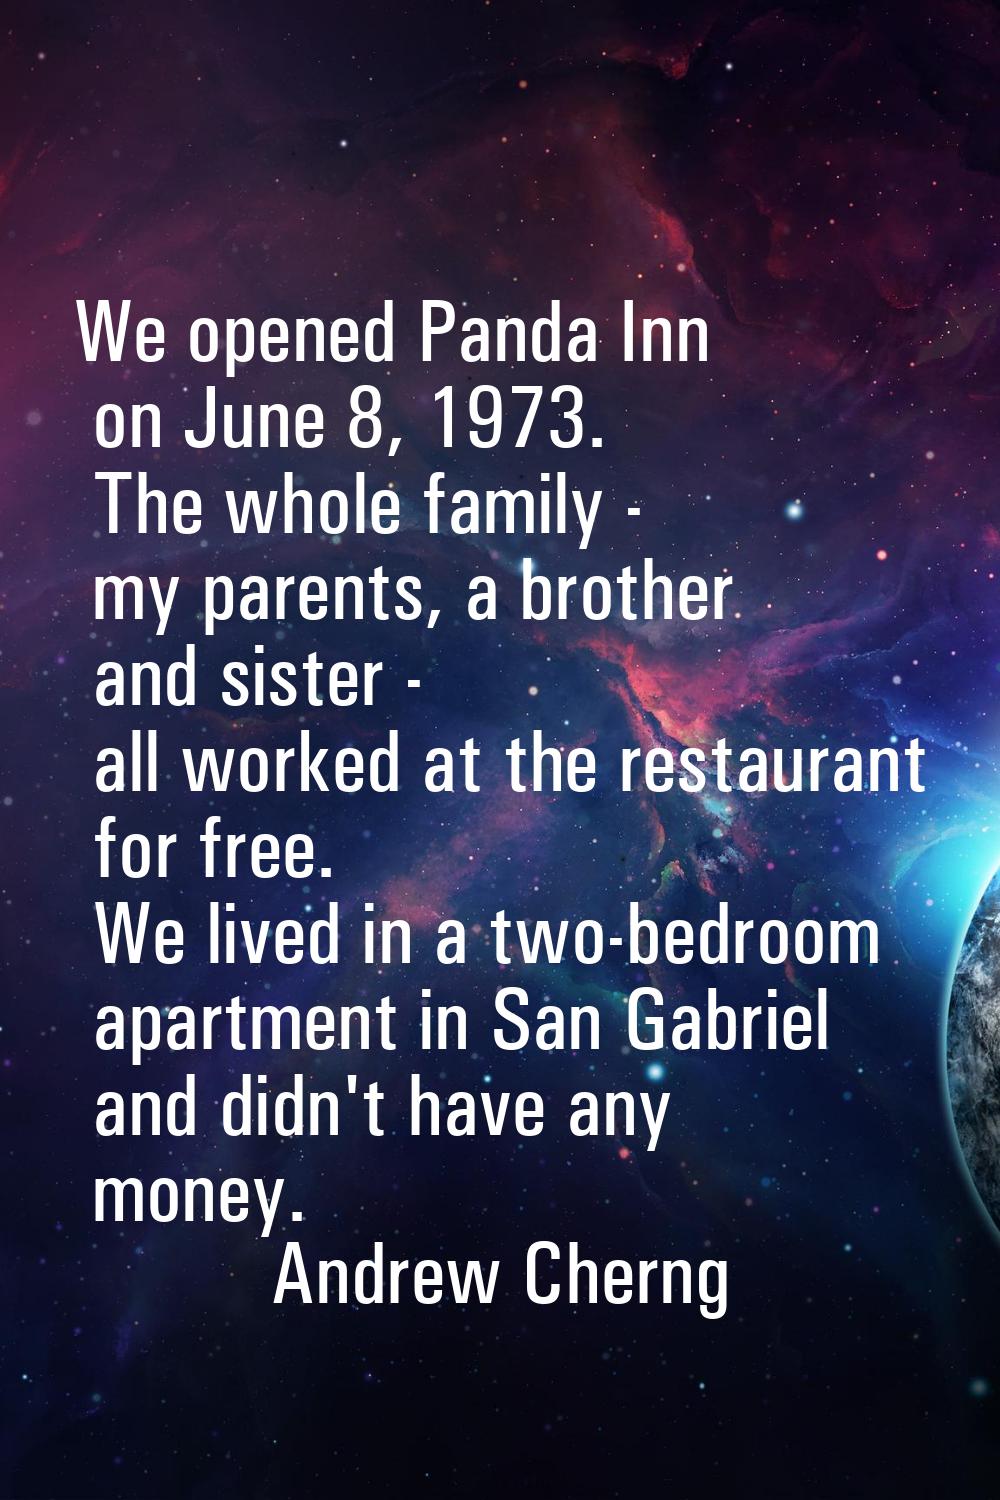 We opened Panda Inn on June 8, 1973. The whole family - my parents, a brother and sister - all work